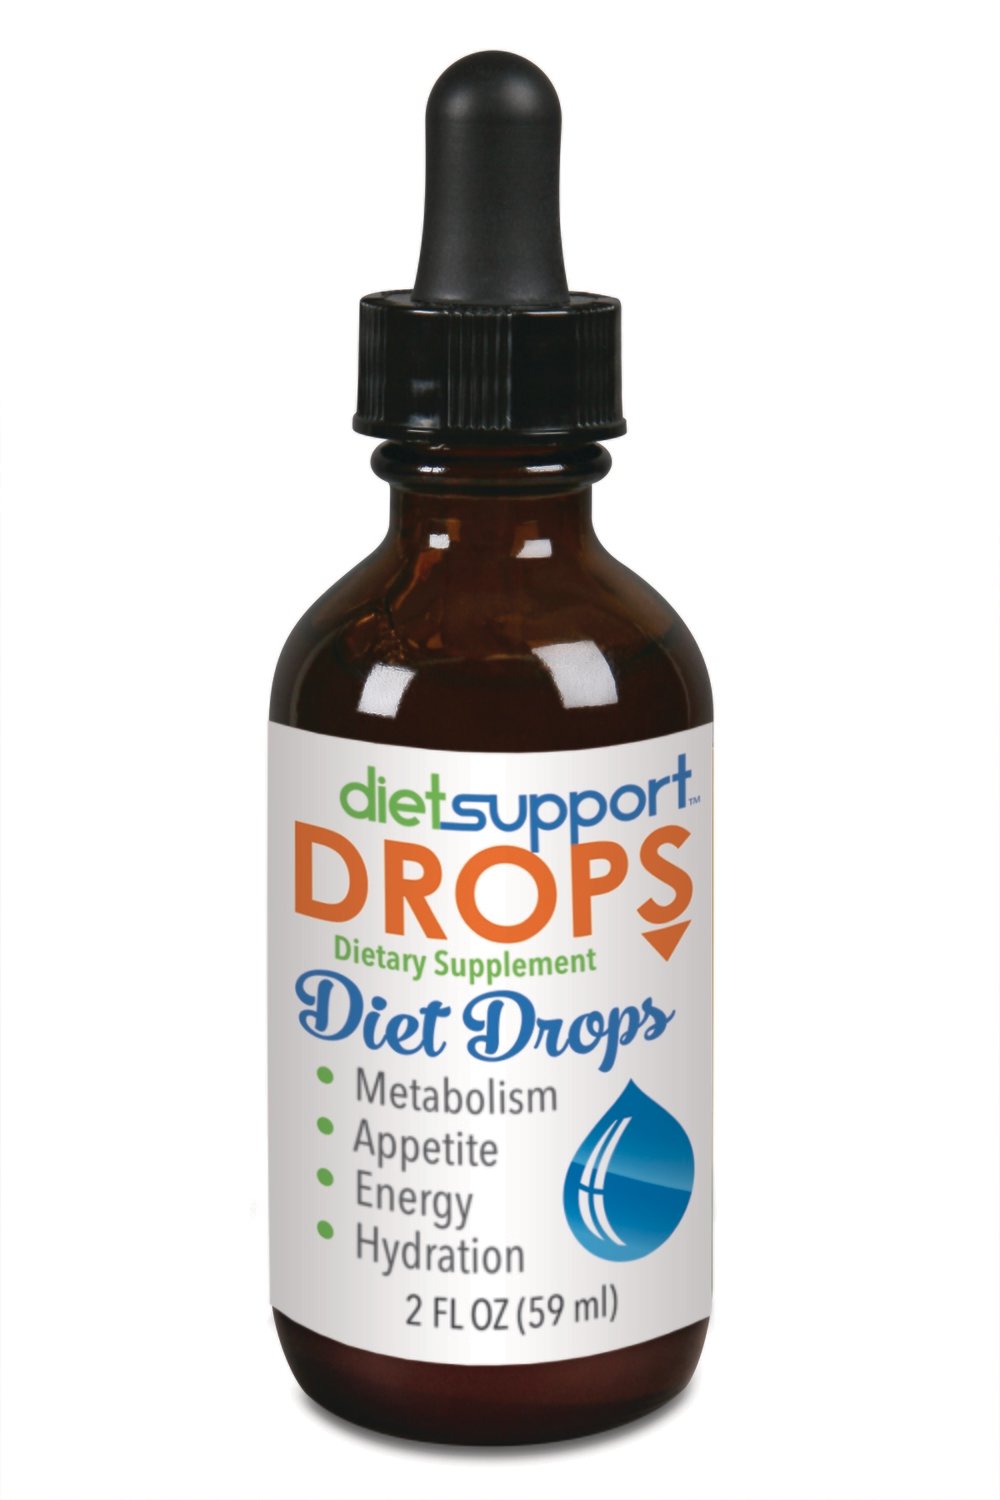 Case of Diet Support Drops